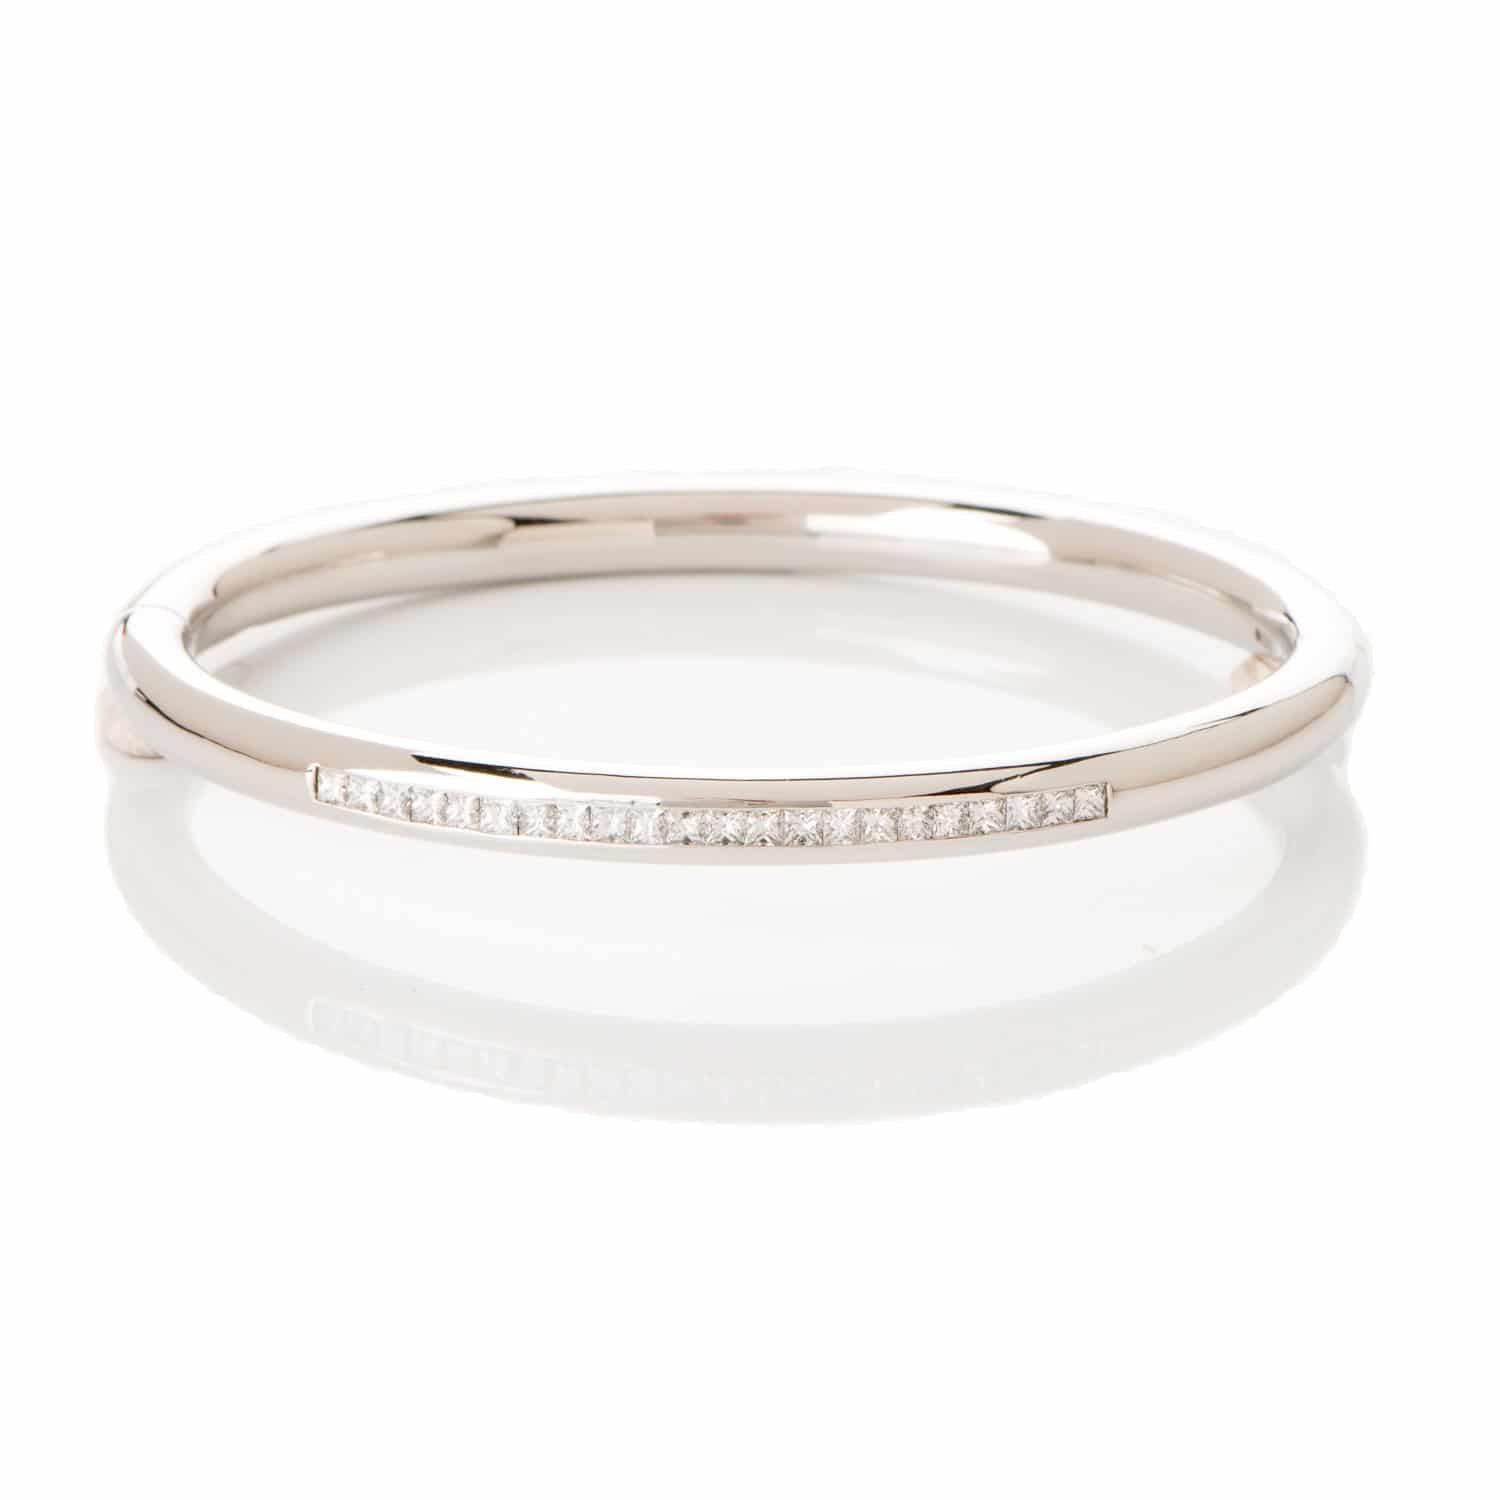 18ct White Gold Bangle With Channel Set Diamonds, 0.93ct